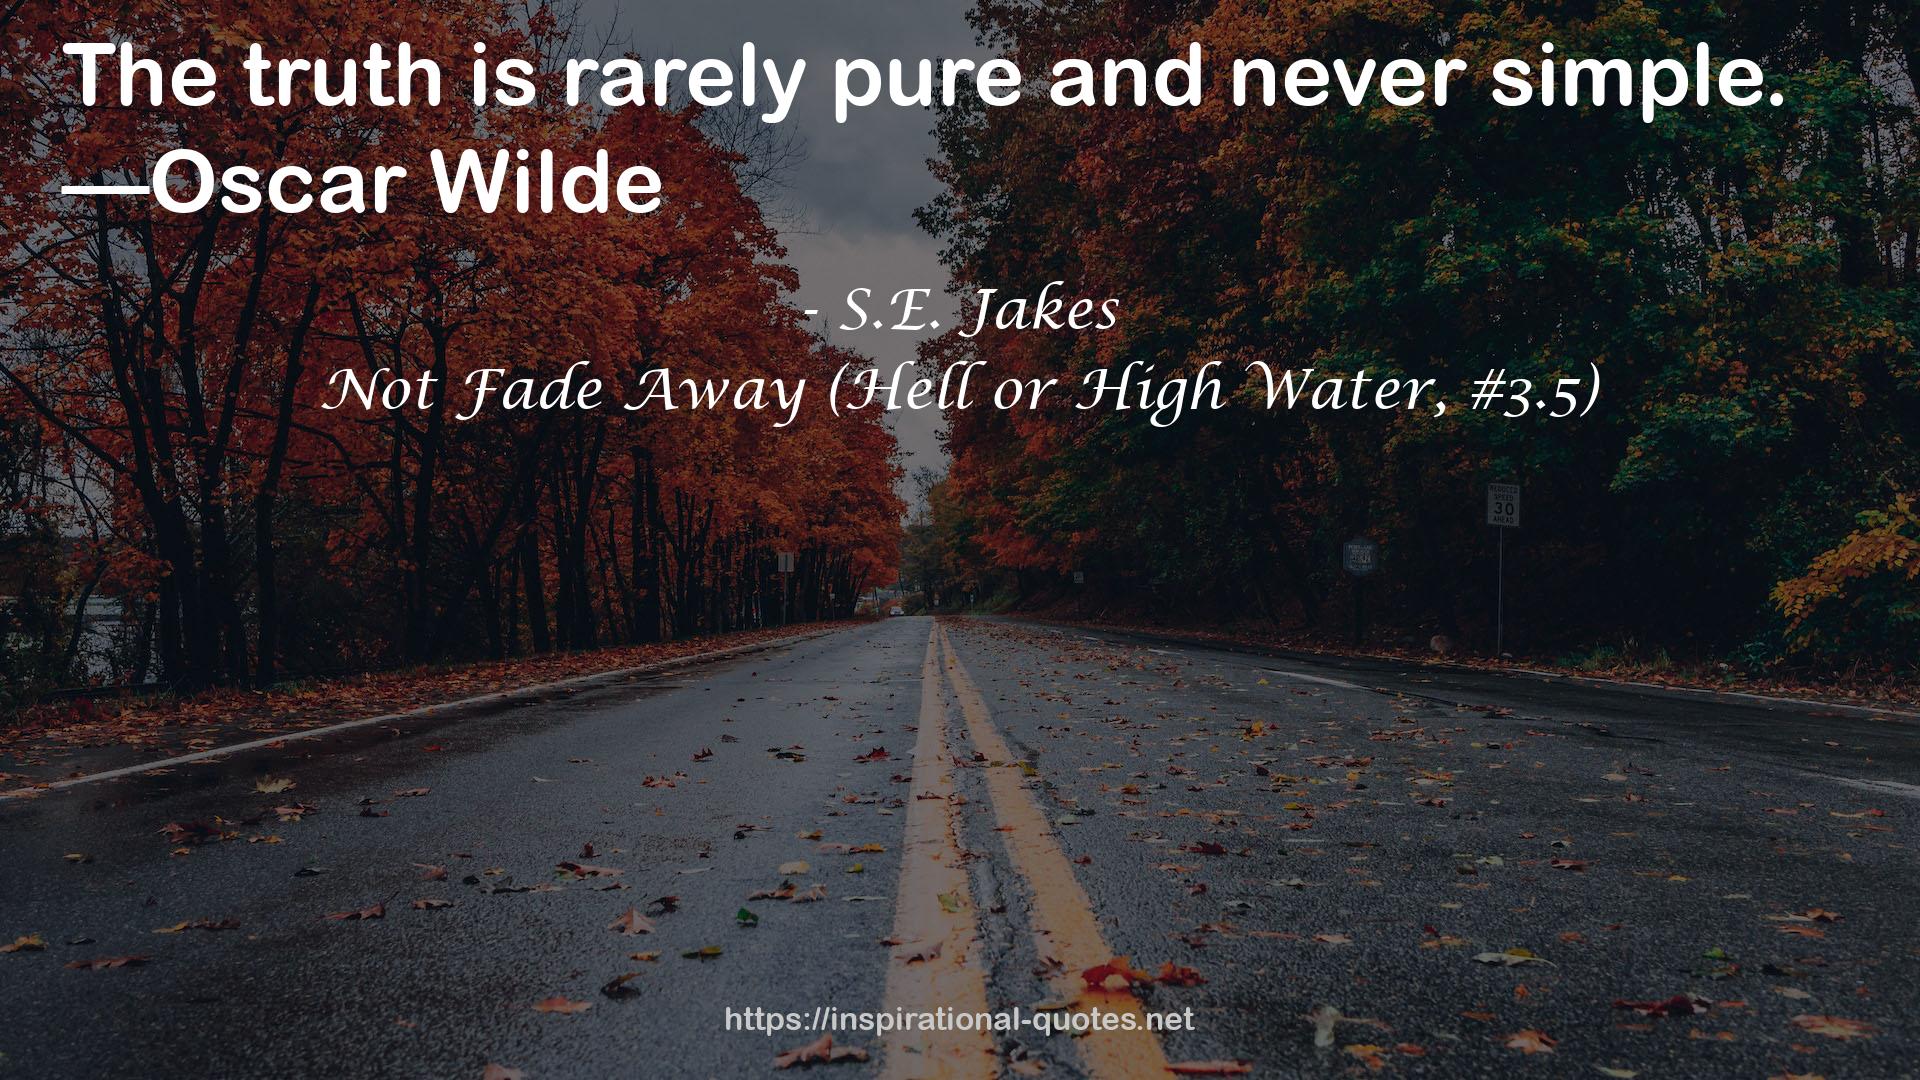 Not Fade Away (Hell or High Water, #3.5) QUOTES